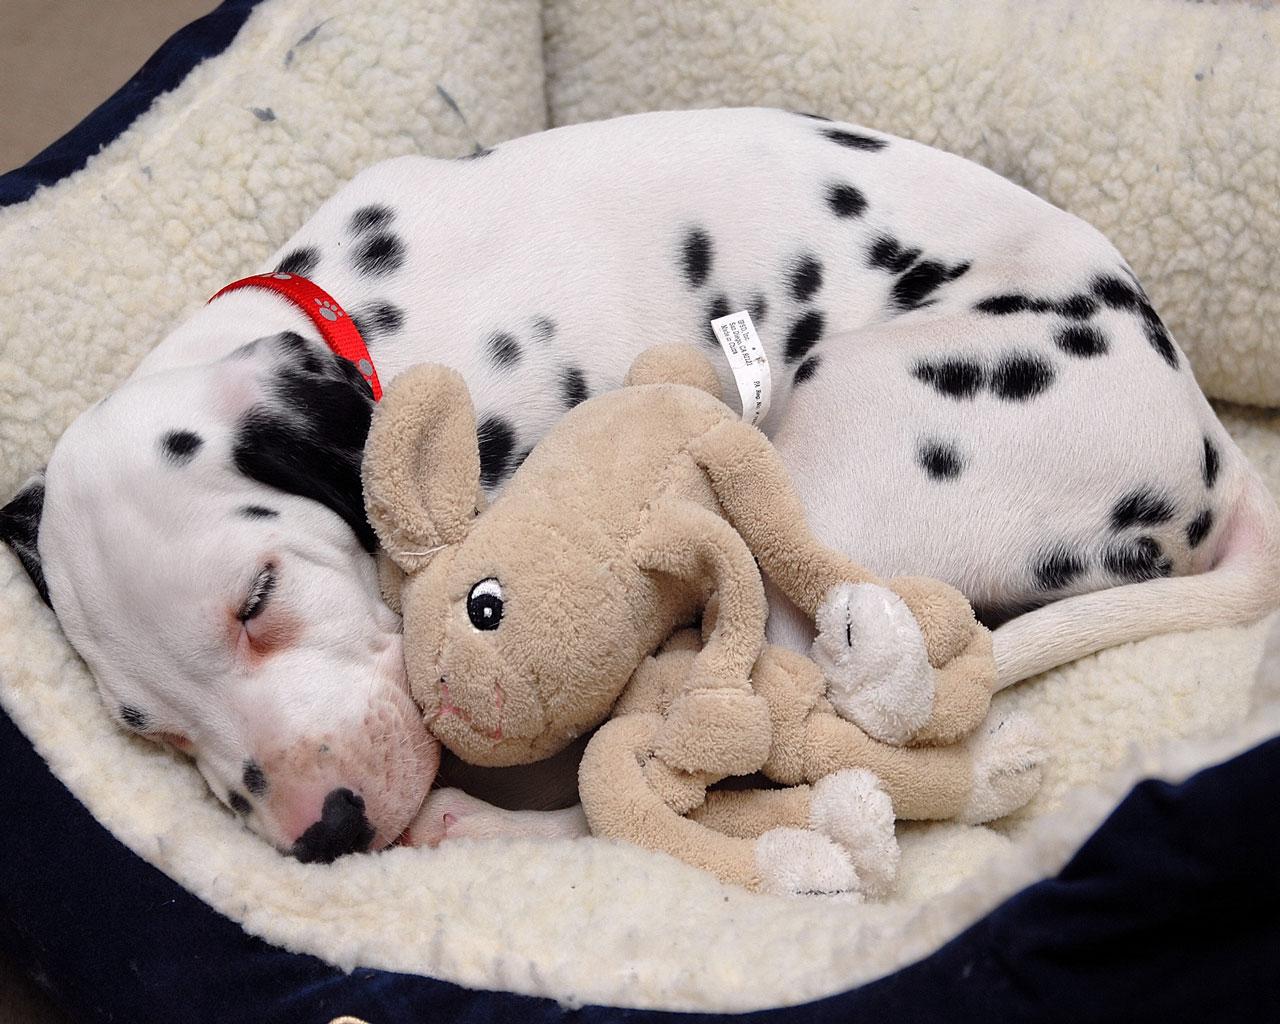 Dalmation - Puppy with Favorite Toy Wallpaper #3 1280 x 1024 